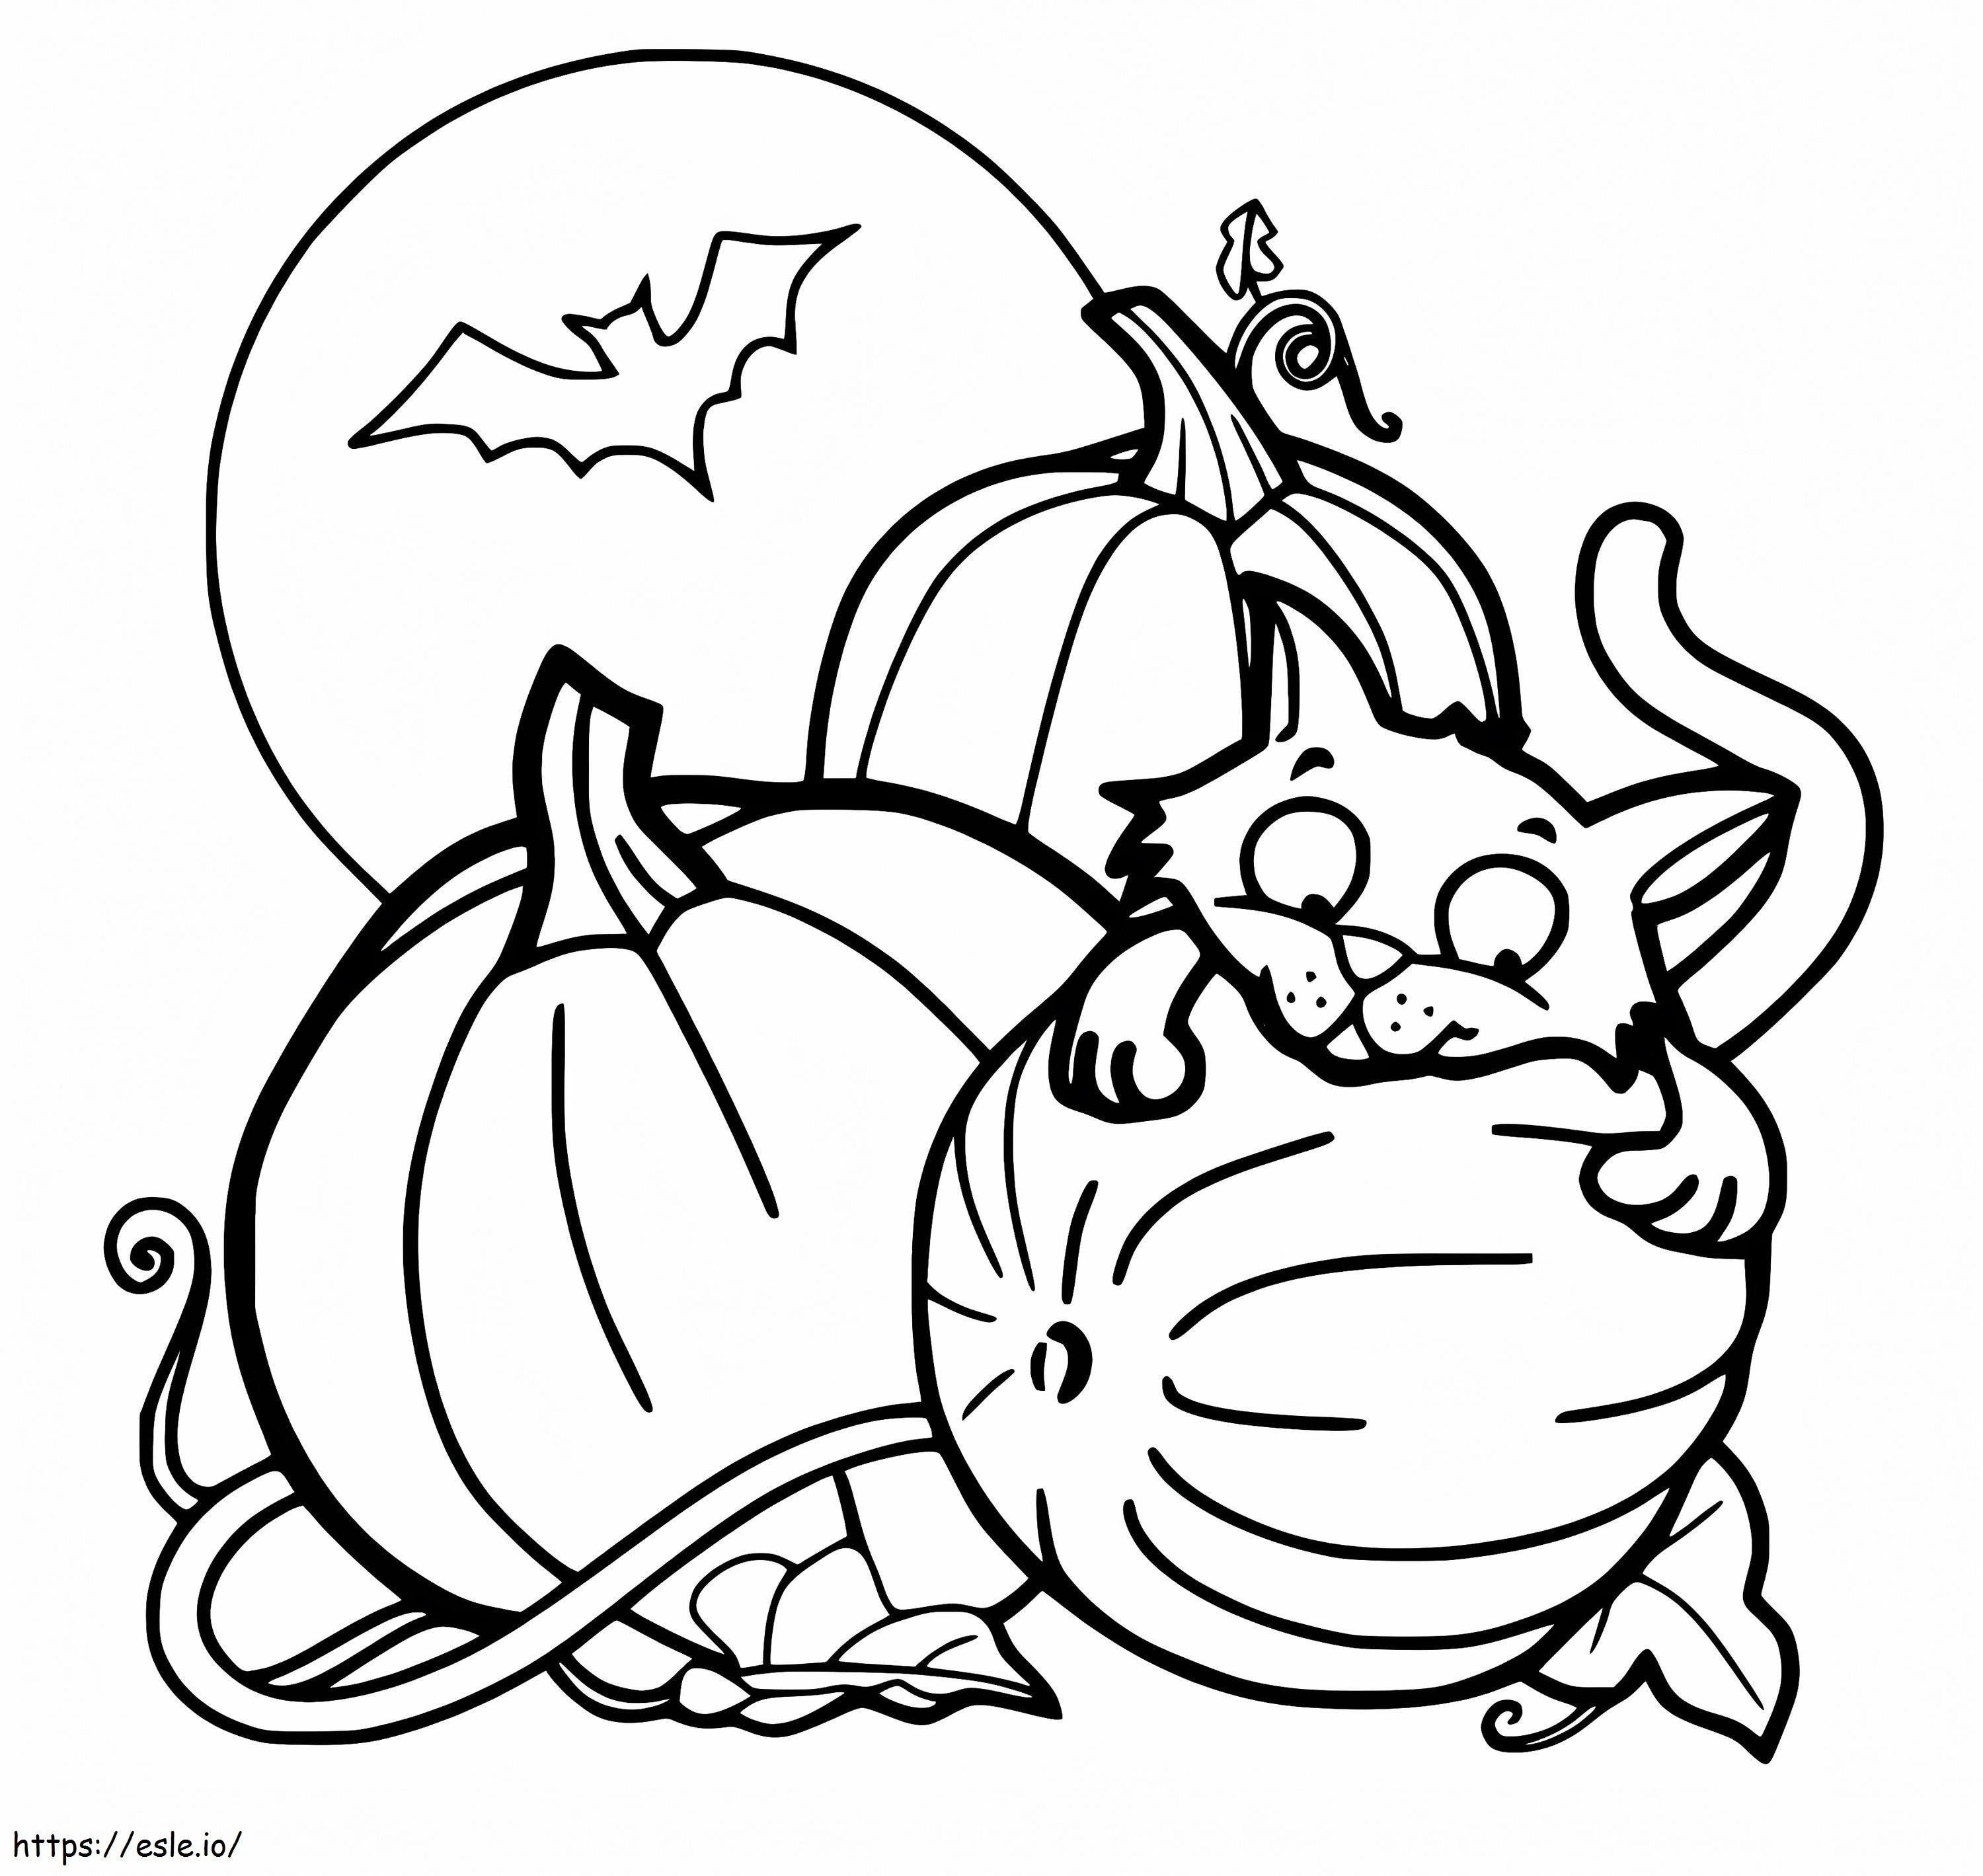 Little Cat And Pumpkins coloring page